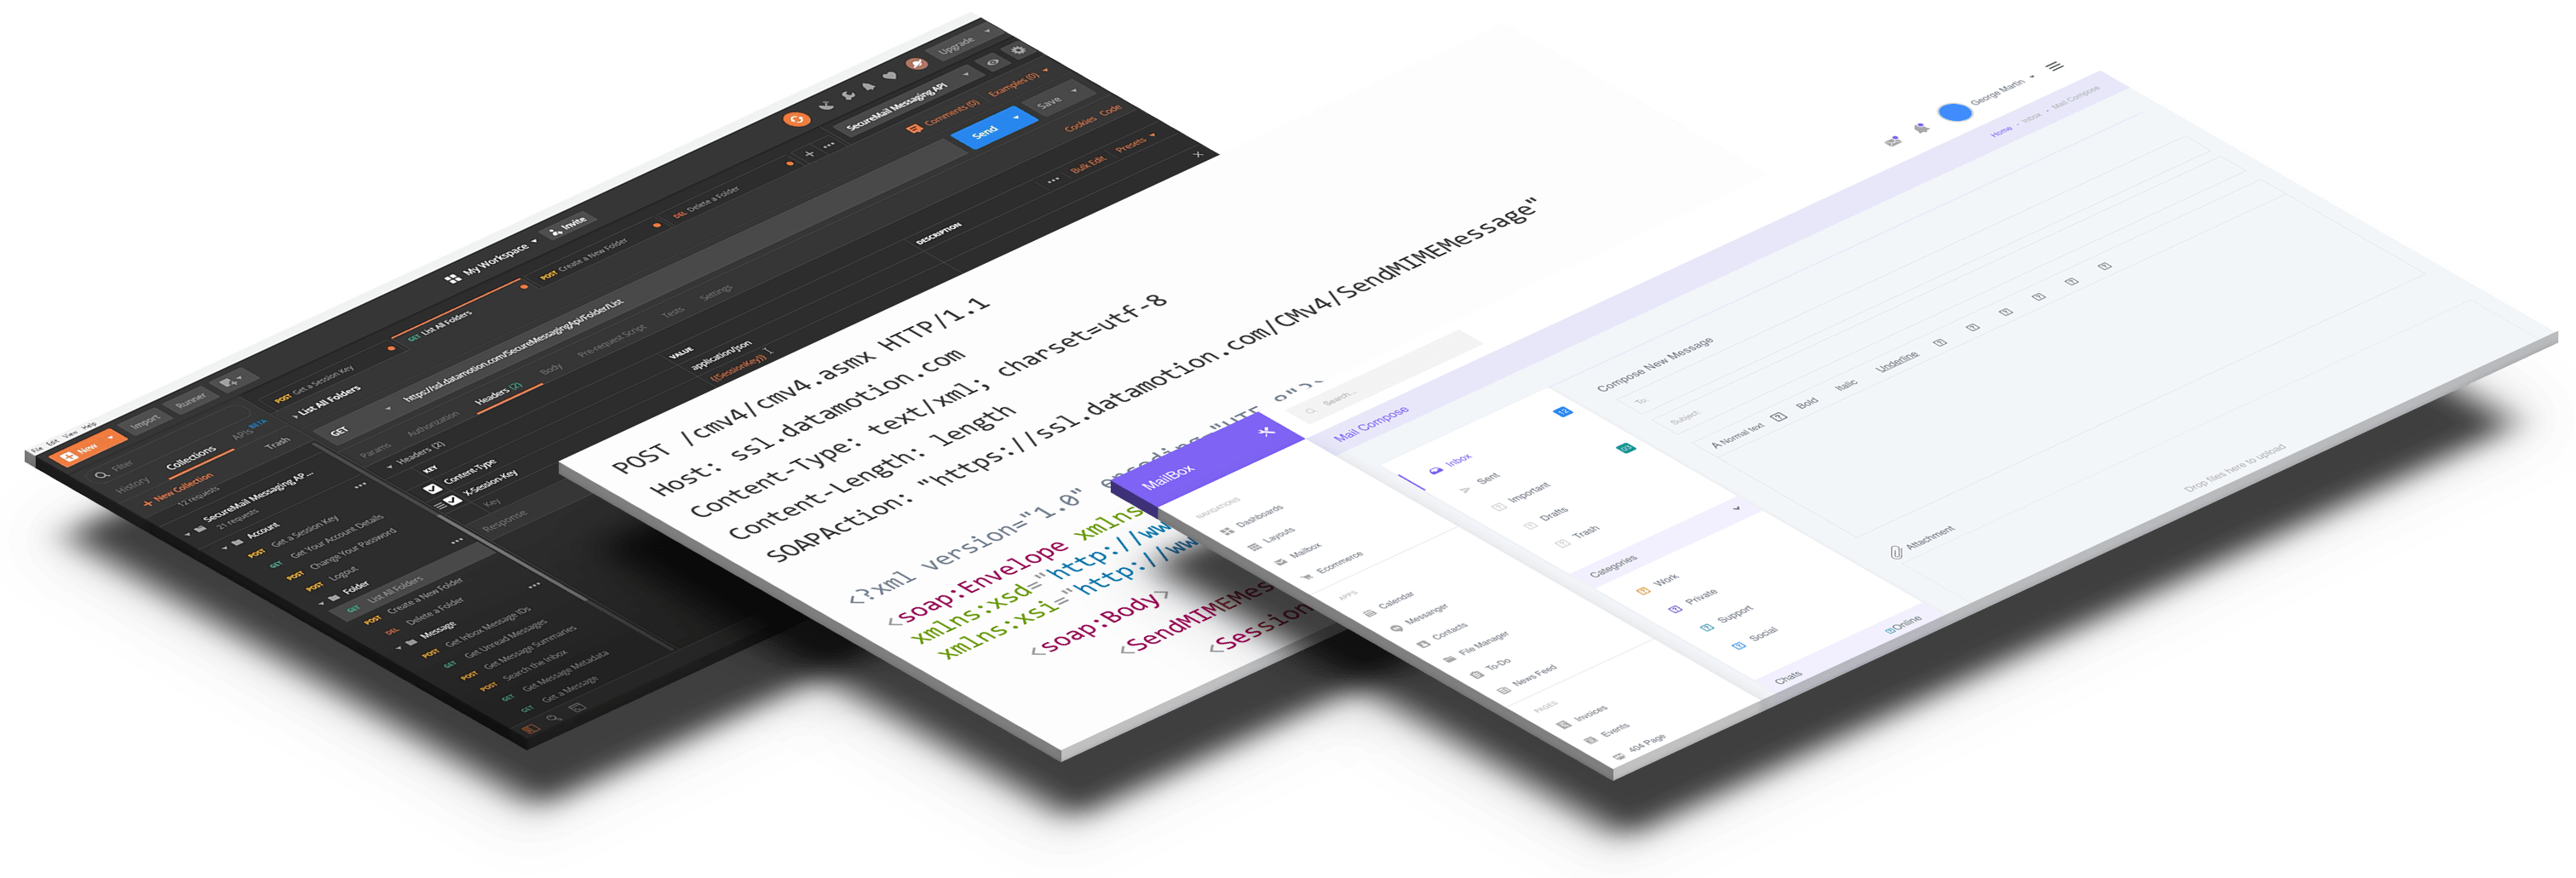 Easily build secure messaging functionalities into an existing or new application, portal, or workflow with DataMotion APIs